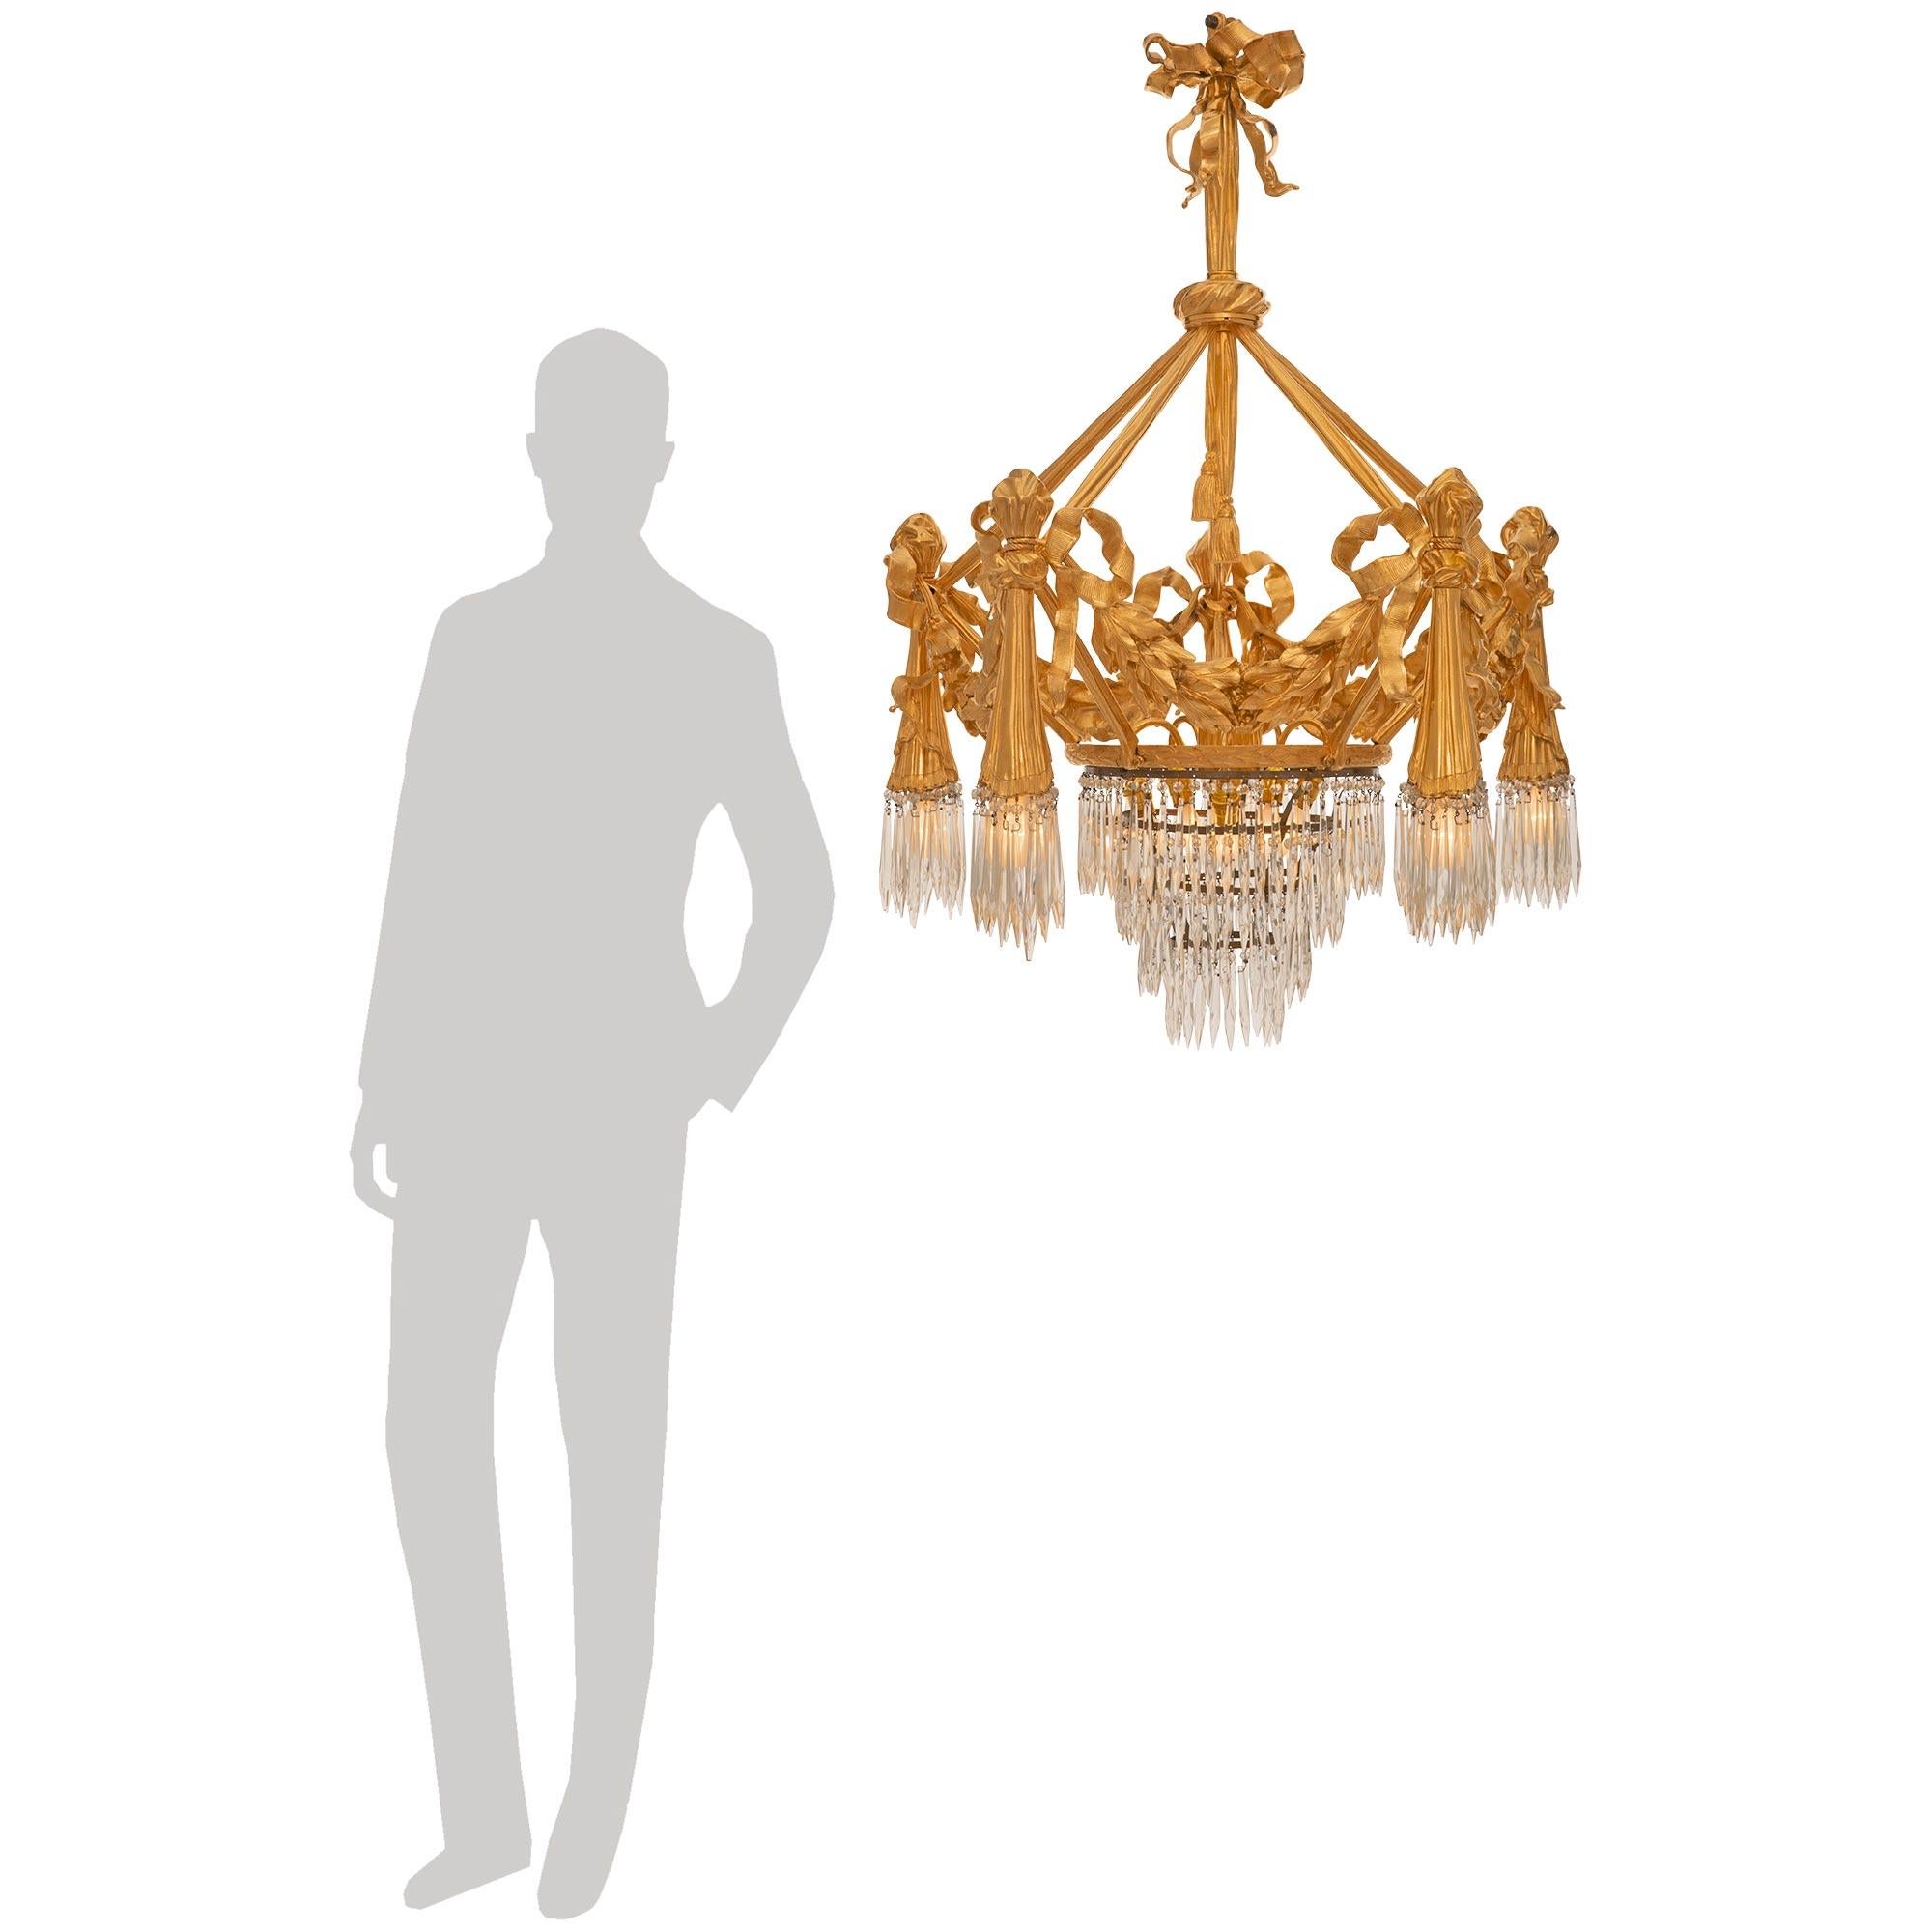 A most impressive and unique French 19th century Neo-Classical st. Ormolu and crystal chandelier. The five arm, ten light chandelier is centered by three stunning tiers of prism shaped crystal pendants below an Ormolu band accented with overlapping